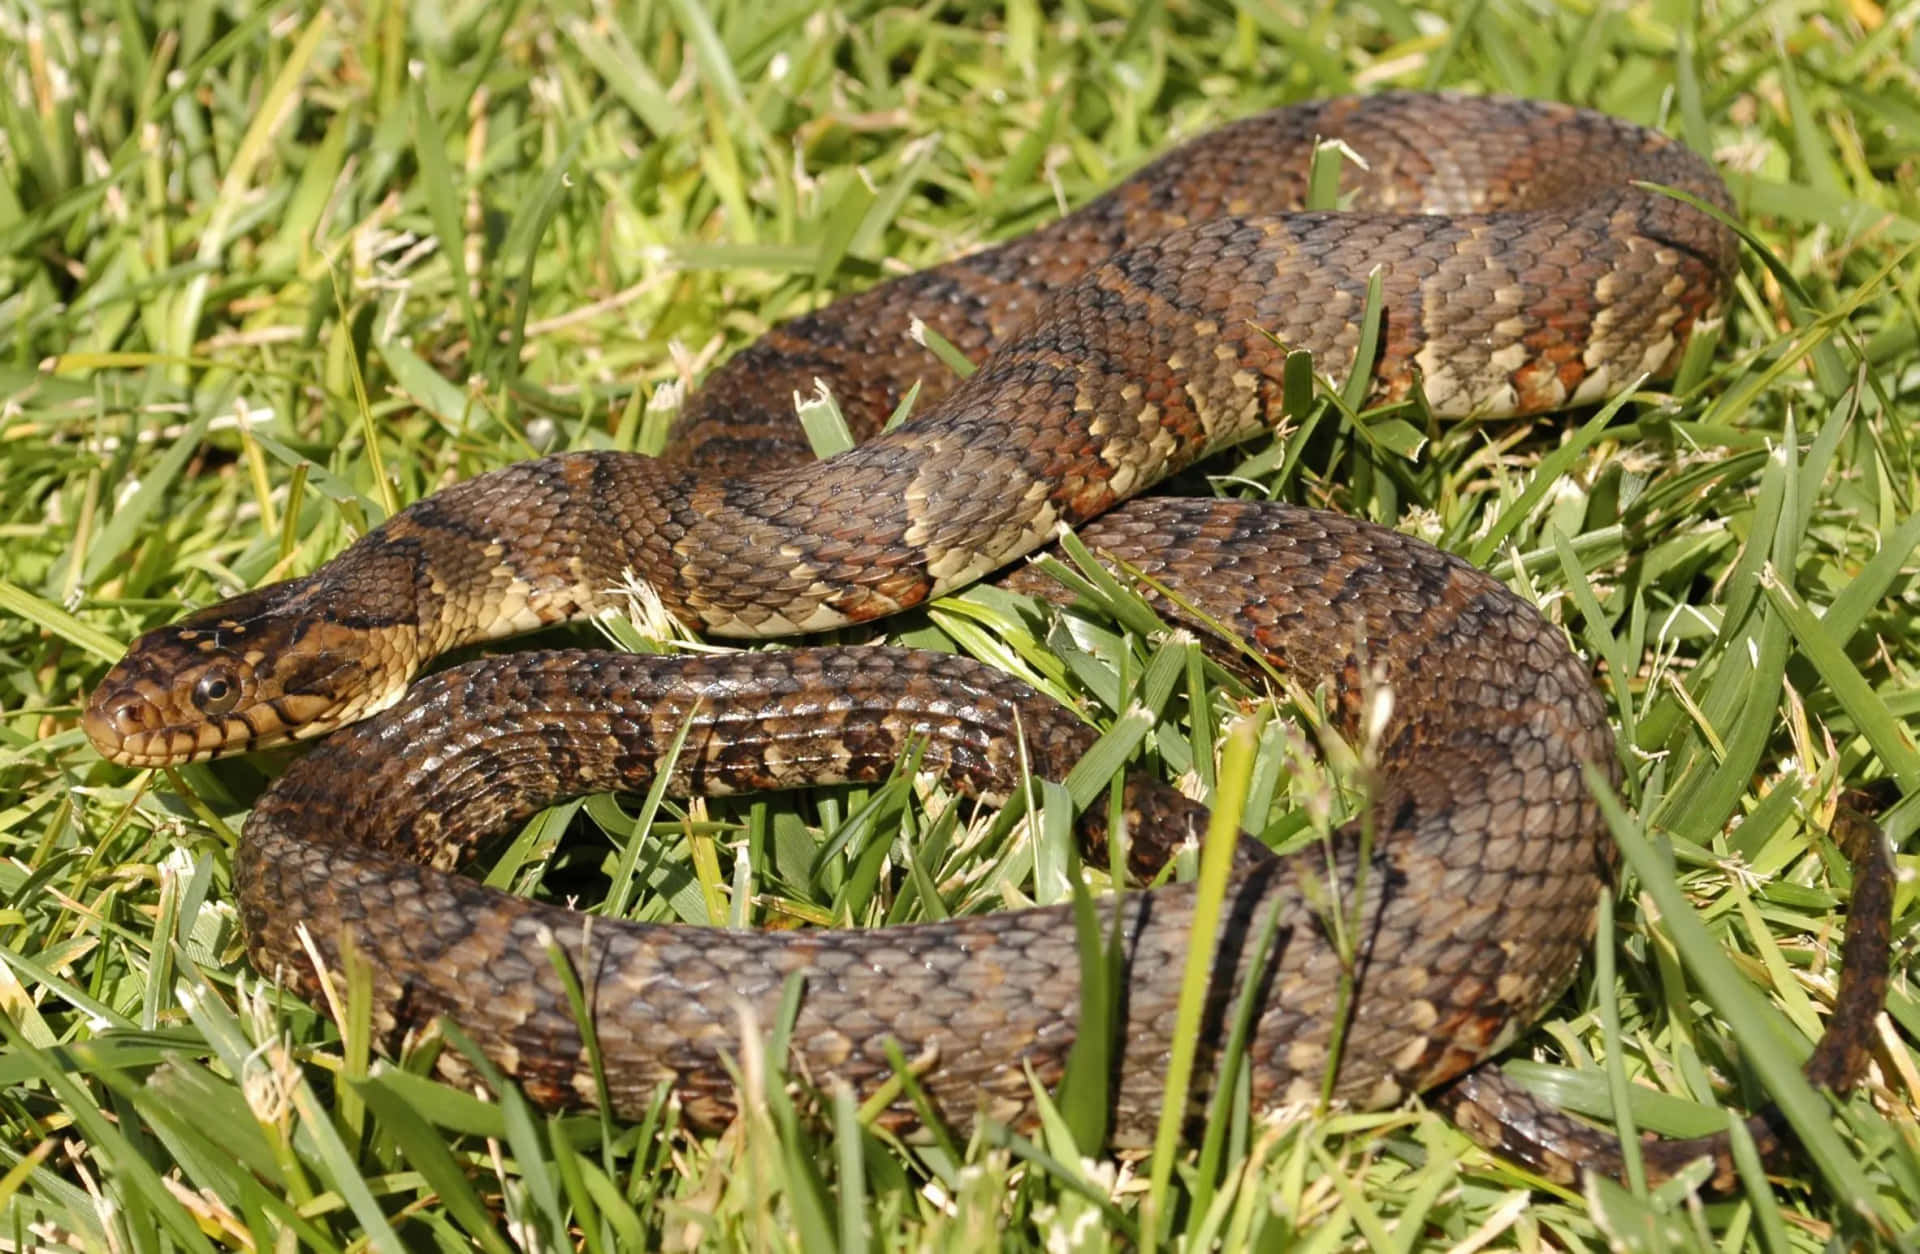 Common Snakes of Michigan